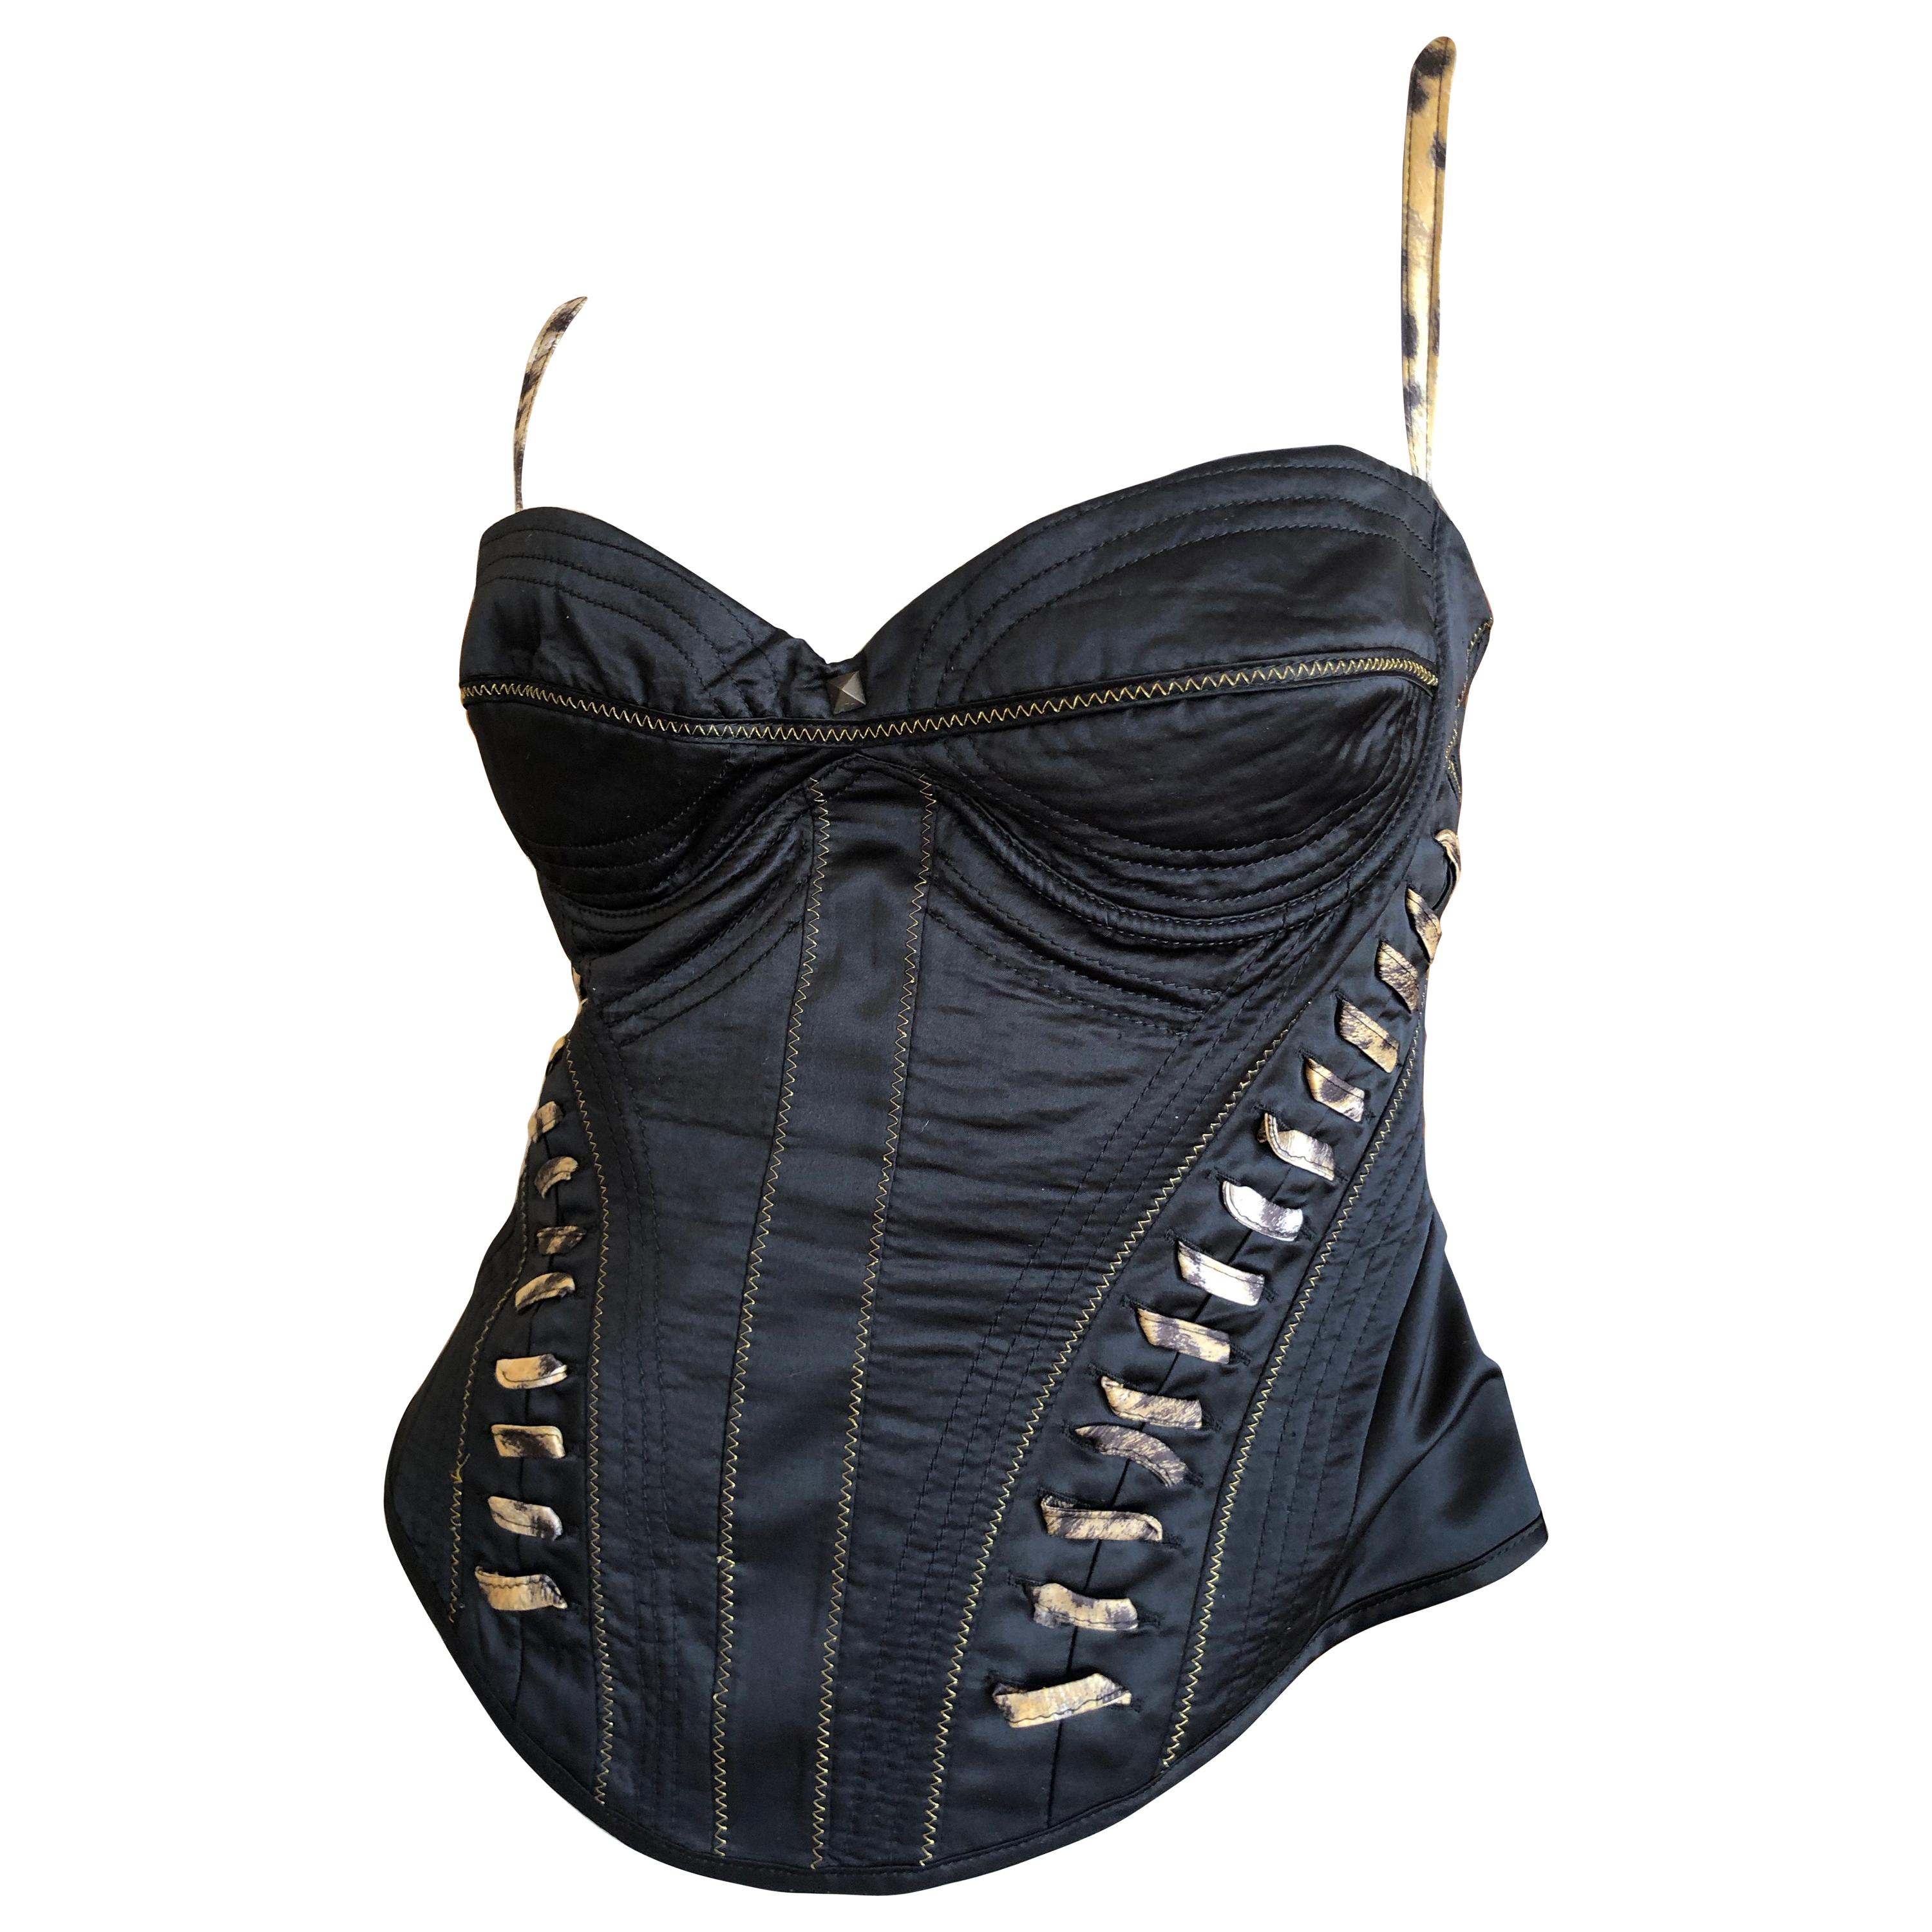 Roberto Cavalli for Just Cavalli Black Corset with Leopard Print Lace Up Details For Sale